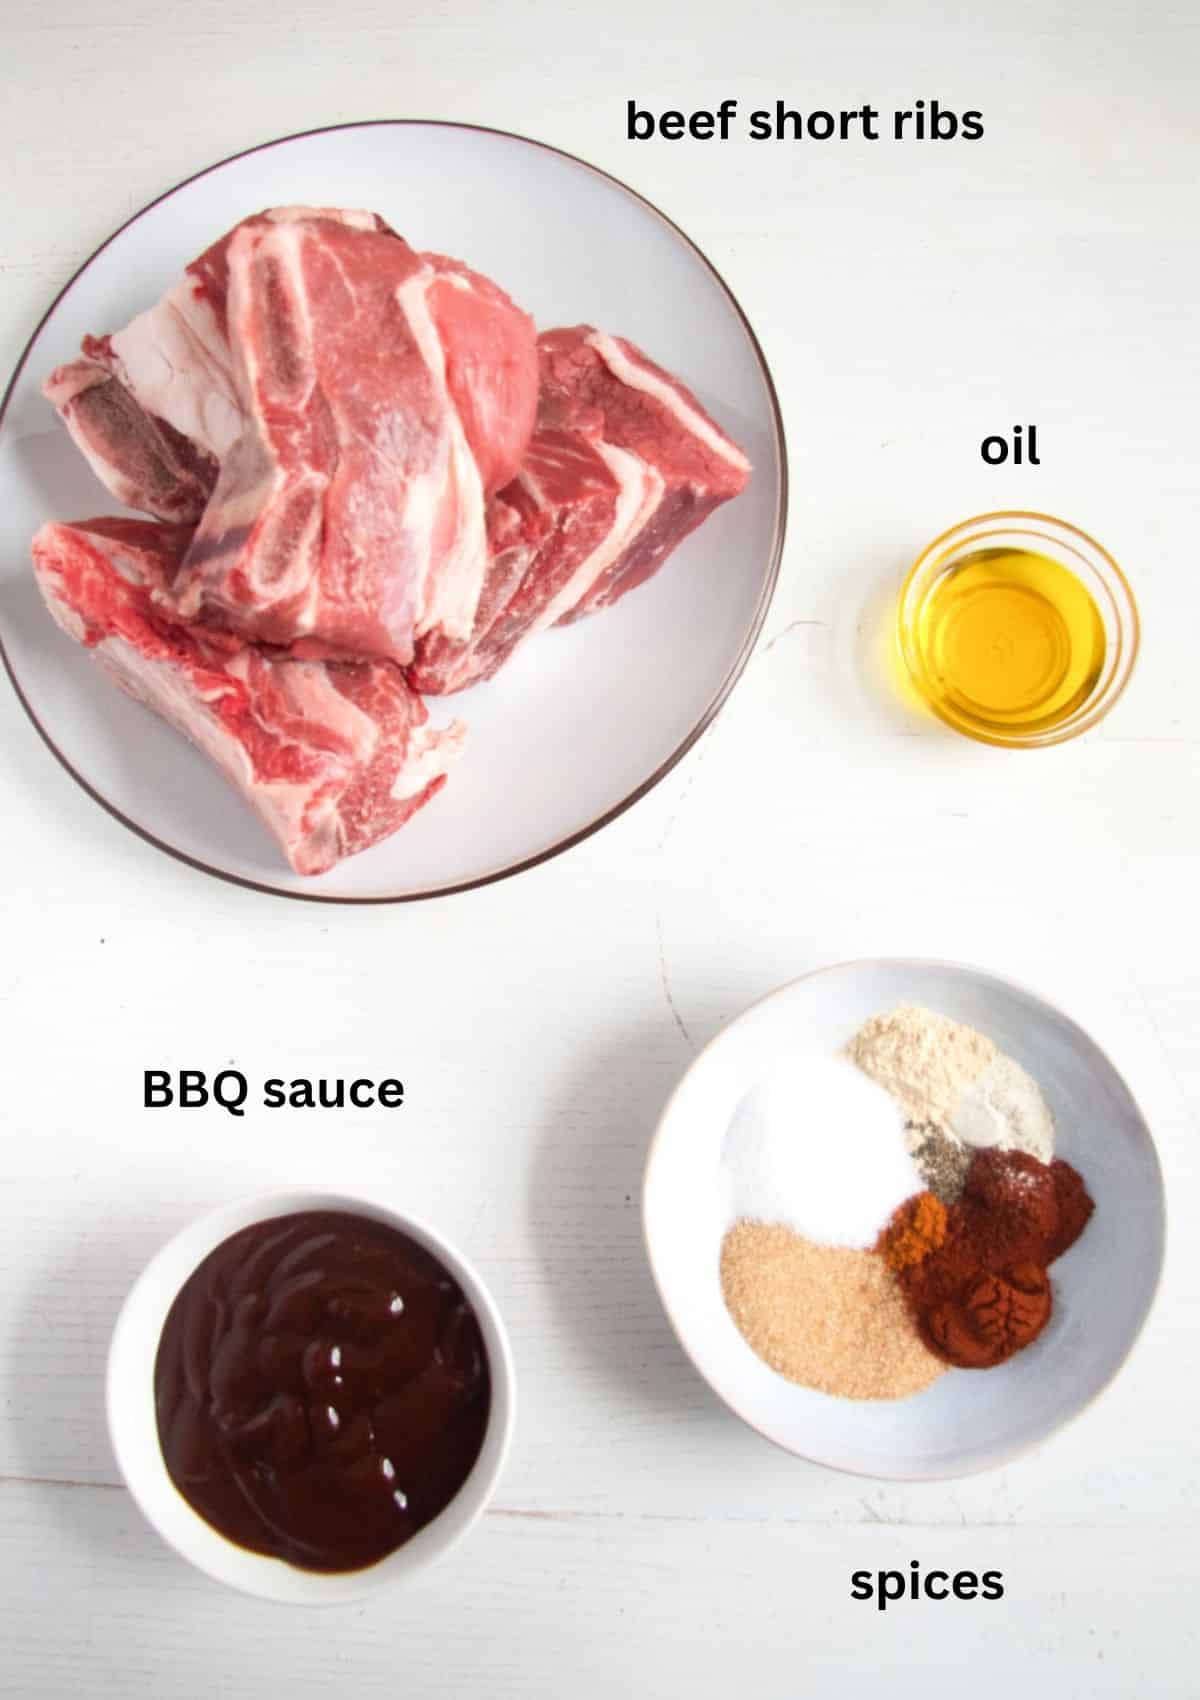 ingredients for making beef ribs in the oven with bbq sauce.